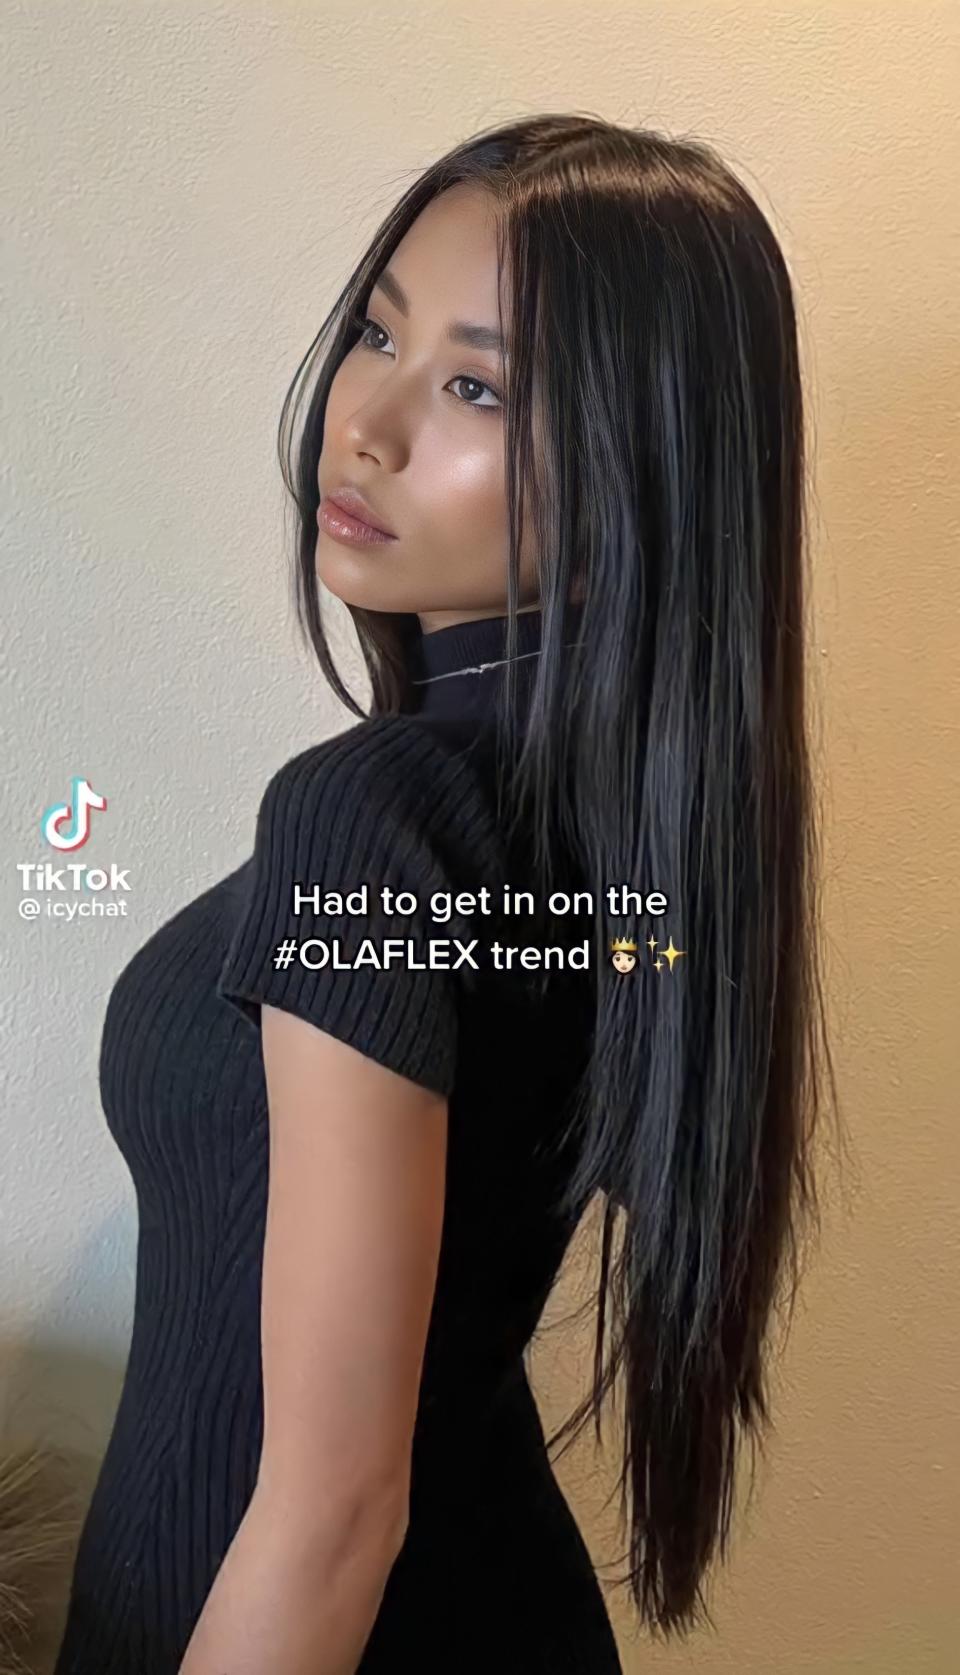 @icychat was among the 400-plus TikTok creators Olaplex tapped for its #Olaflex challenge.